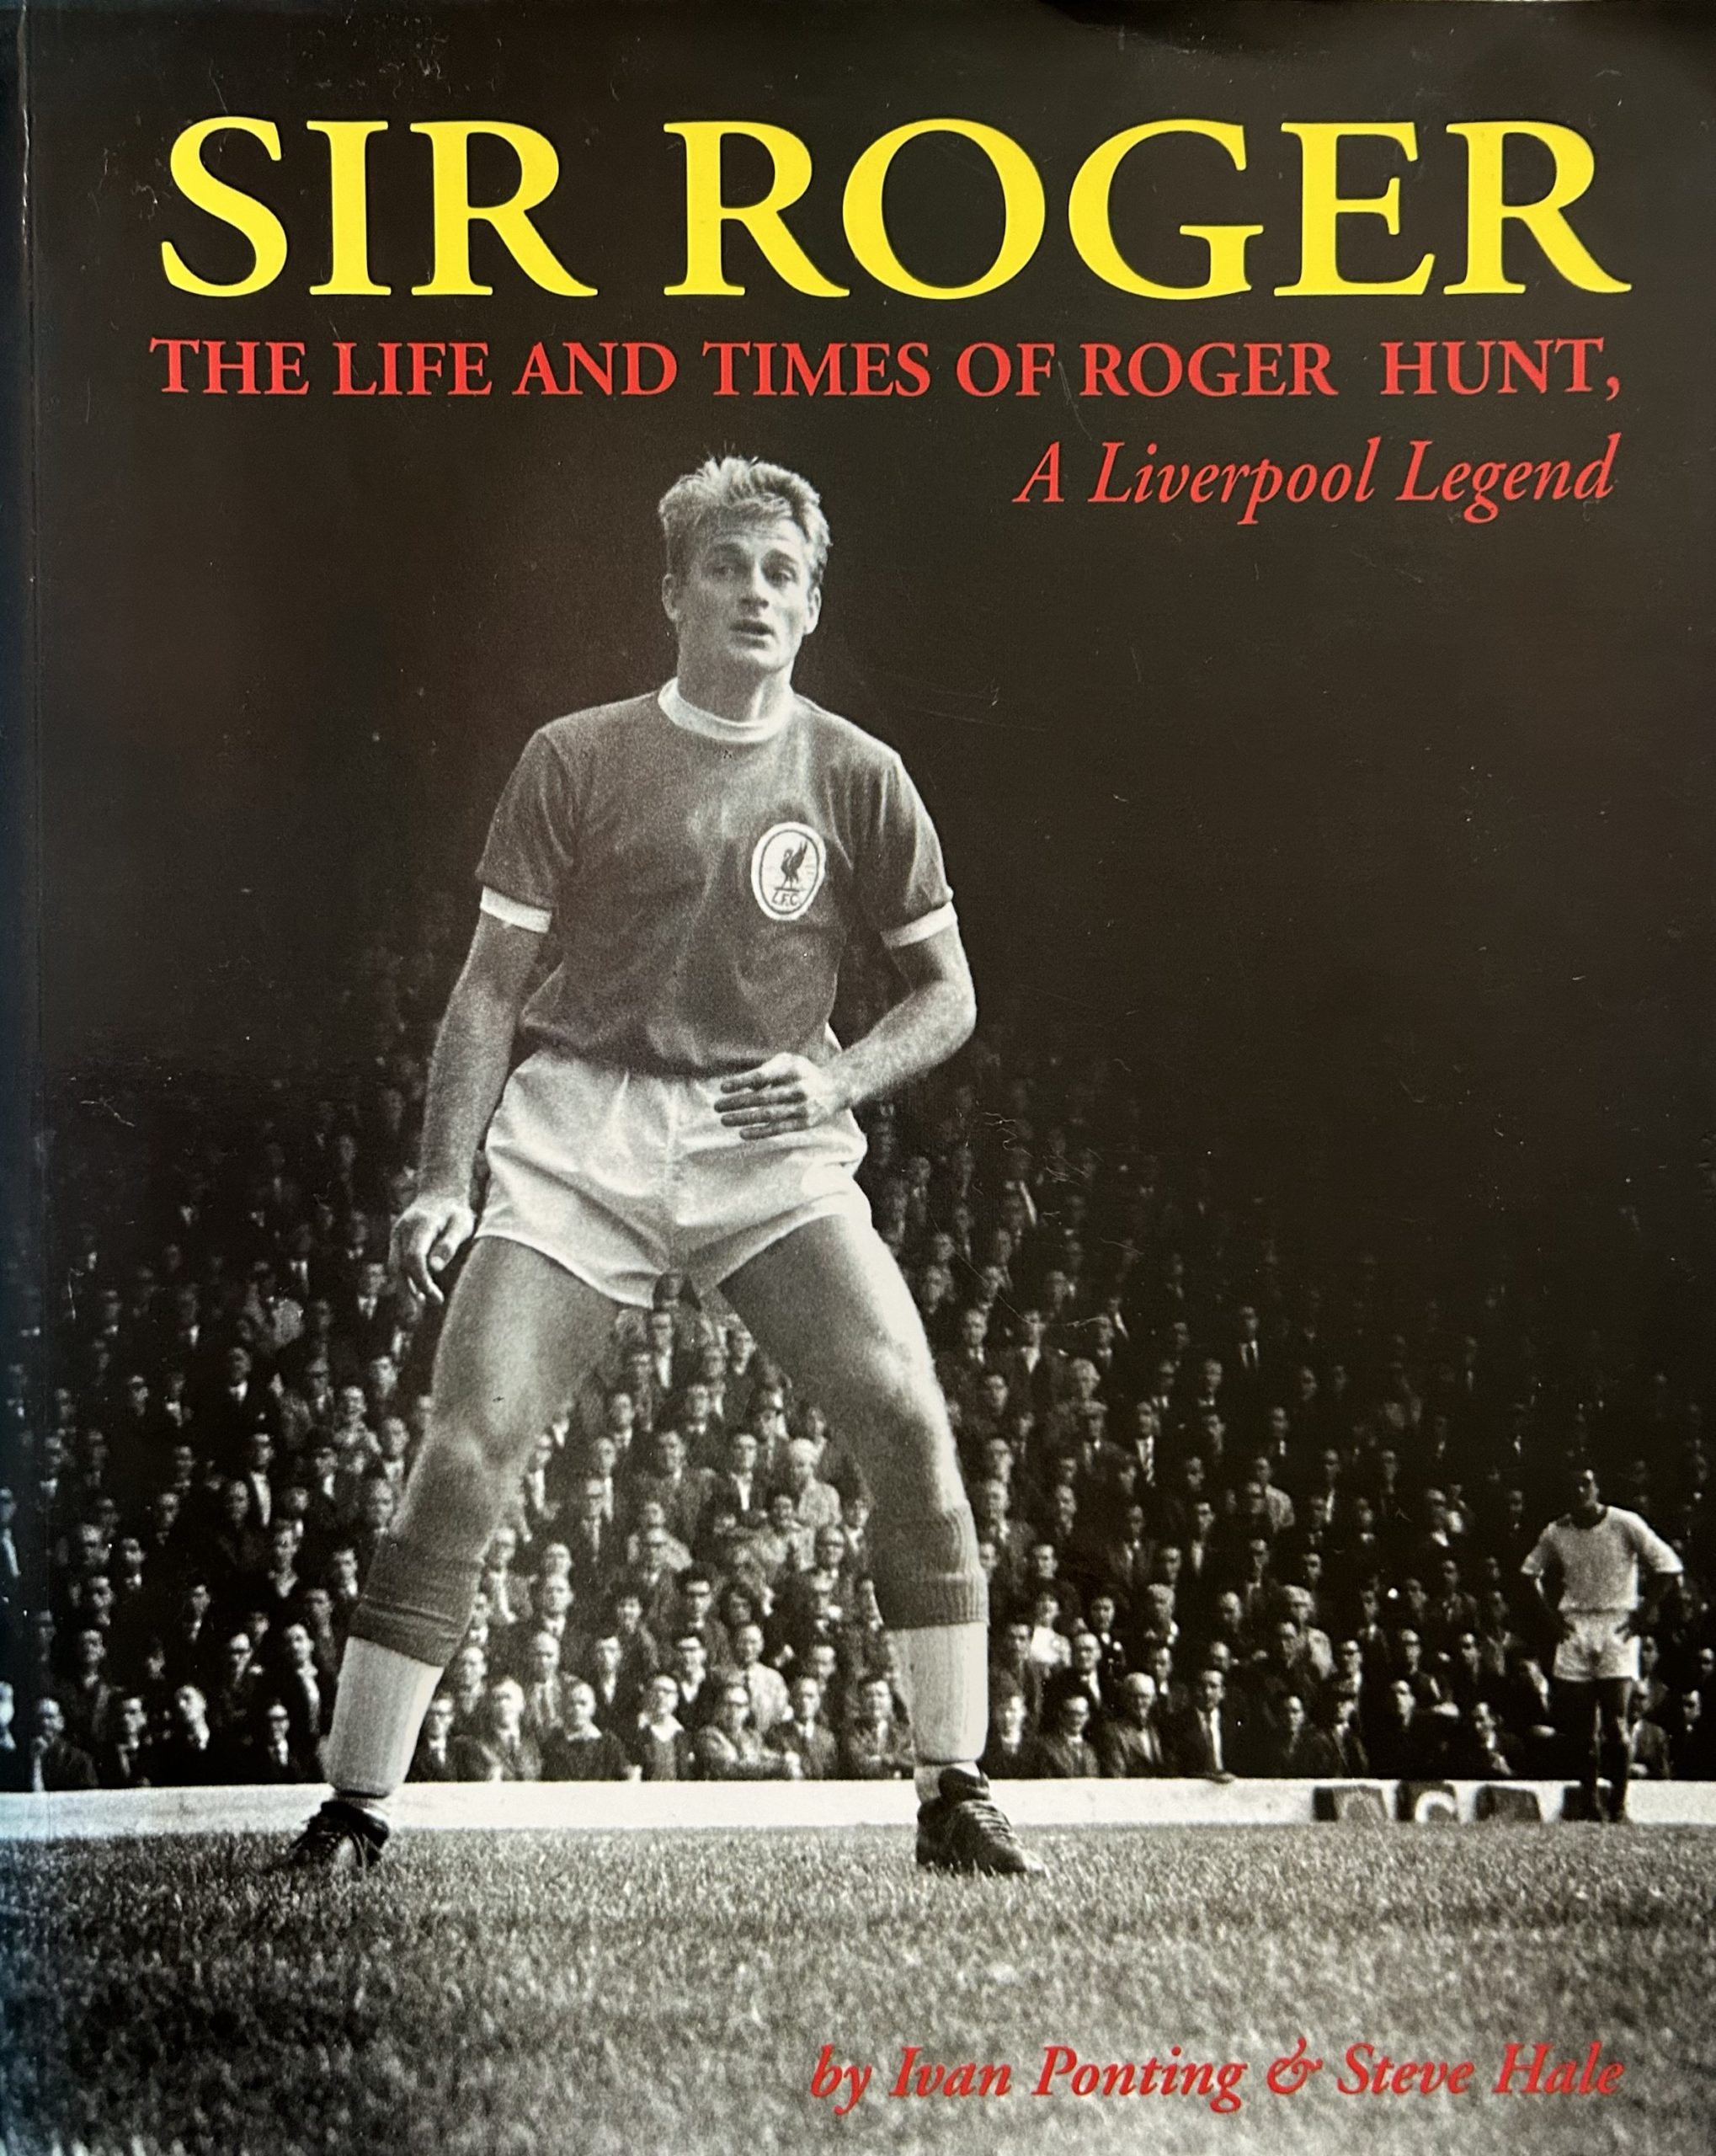 Sir Roger: The Life and Times of Roger Hunt - A Liverpool Legend by Ivan Ponting & Steve Hale